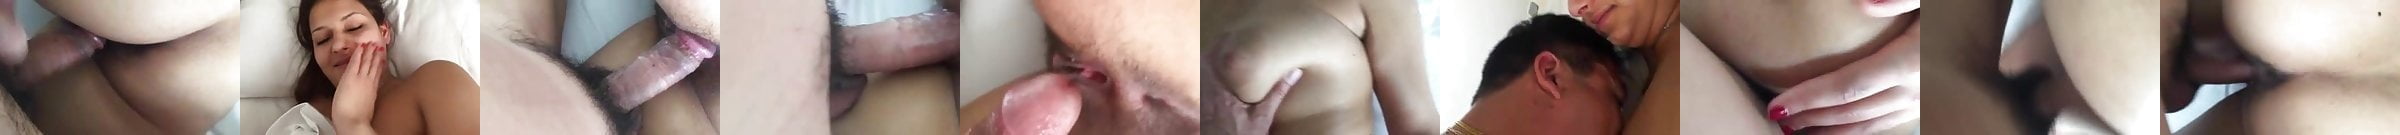 Couples Riding Mp4 Free Indian Porn Video 19 Xhamster